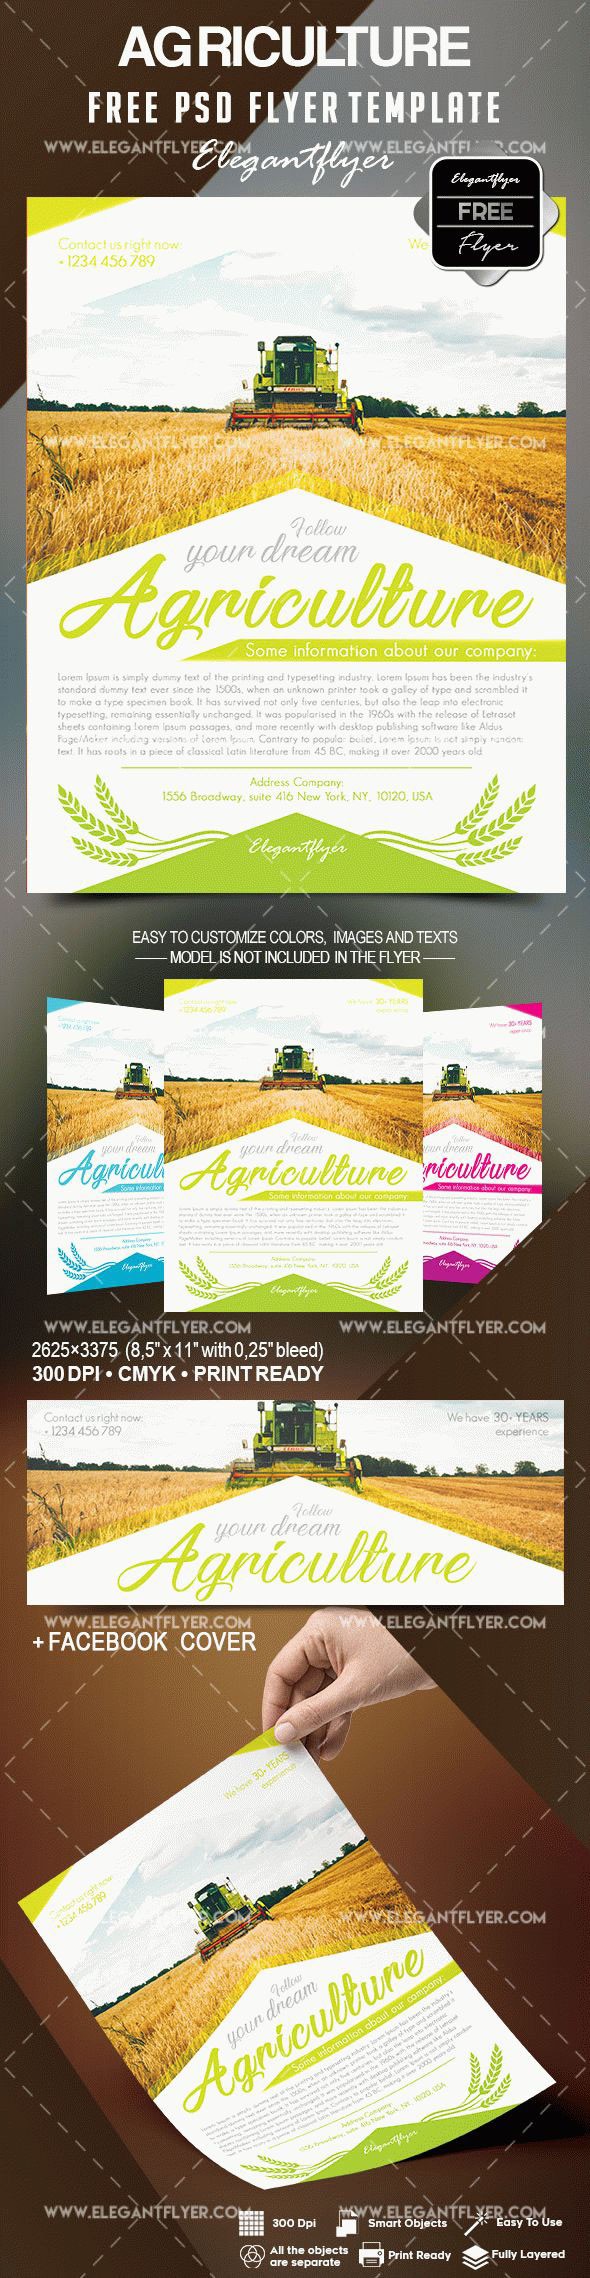 Free Agriculture Flyer Templates On